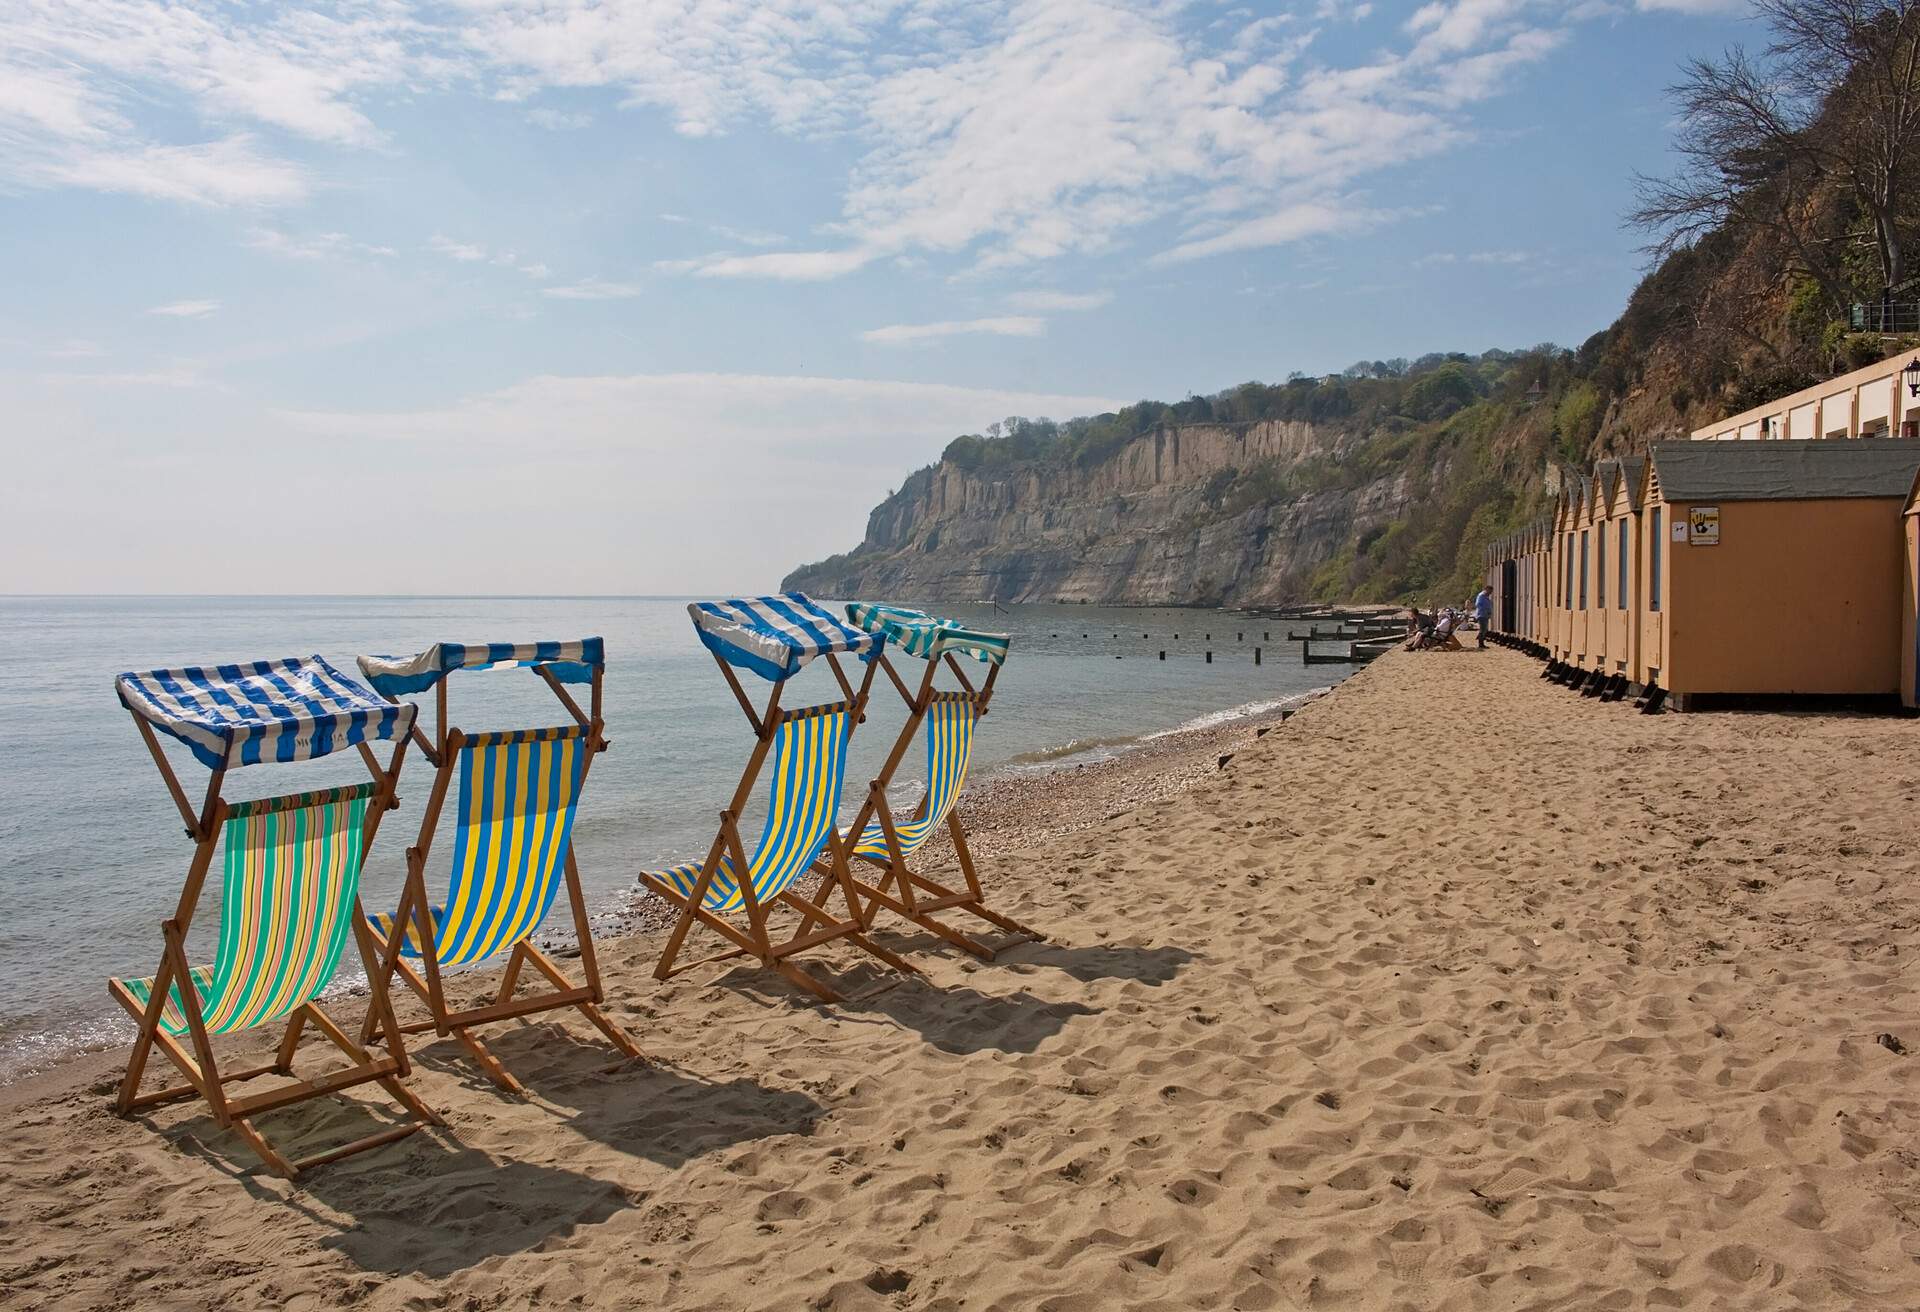 Deck chairs line the beach next to the beach huts on the right at Shanklin in the Isle of Wight